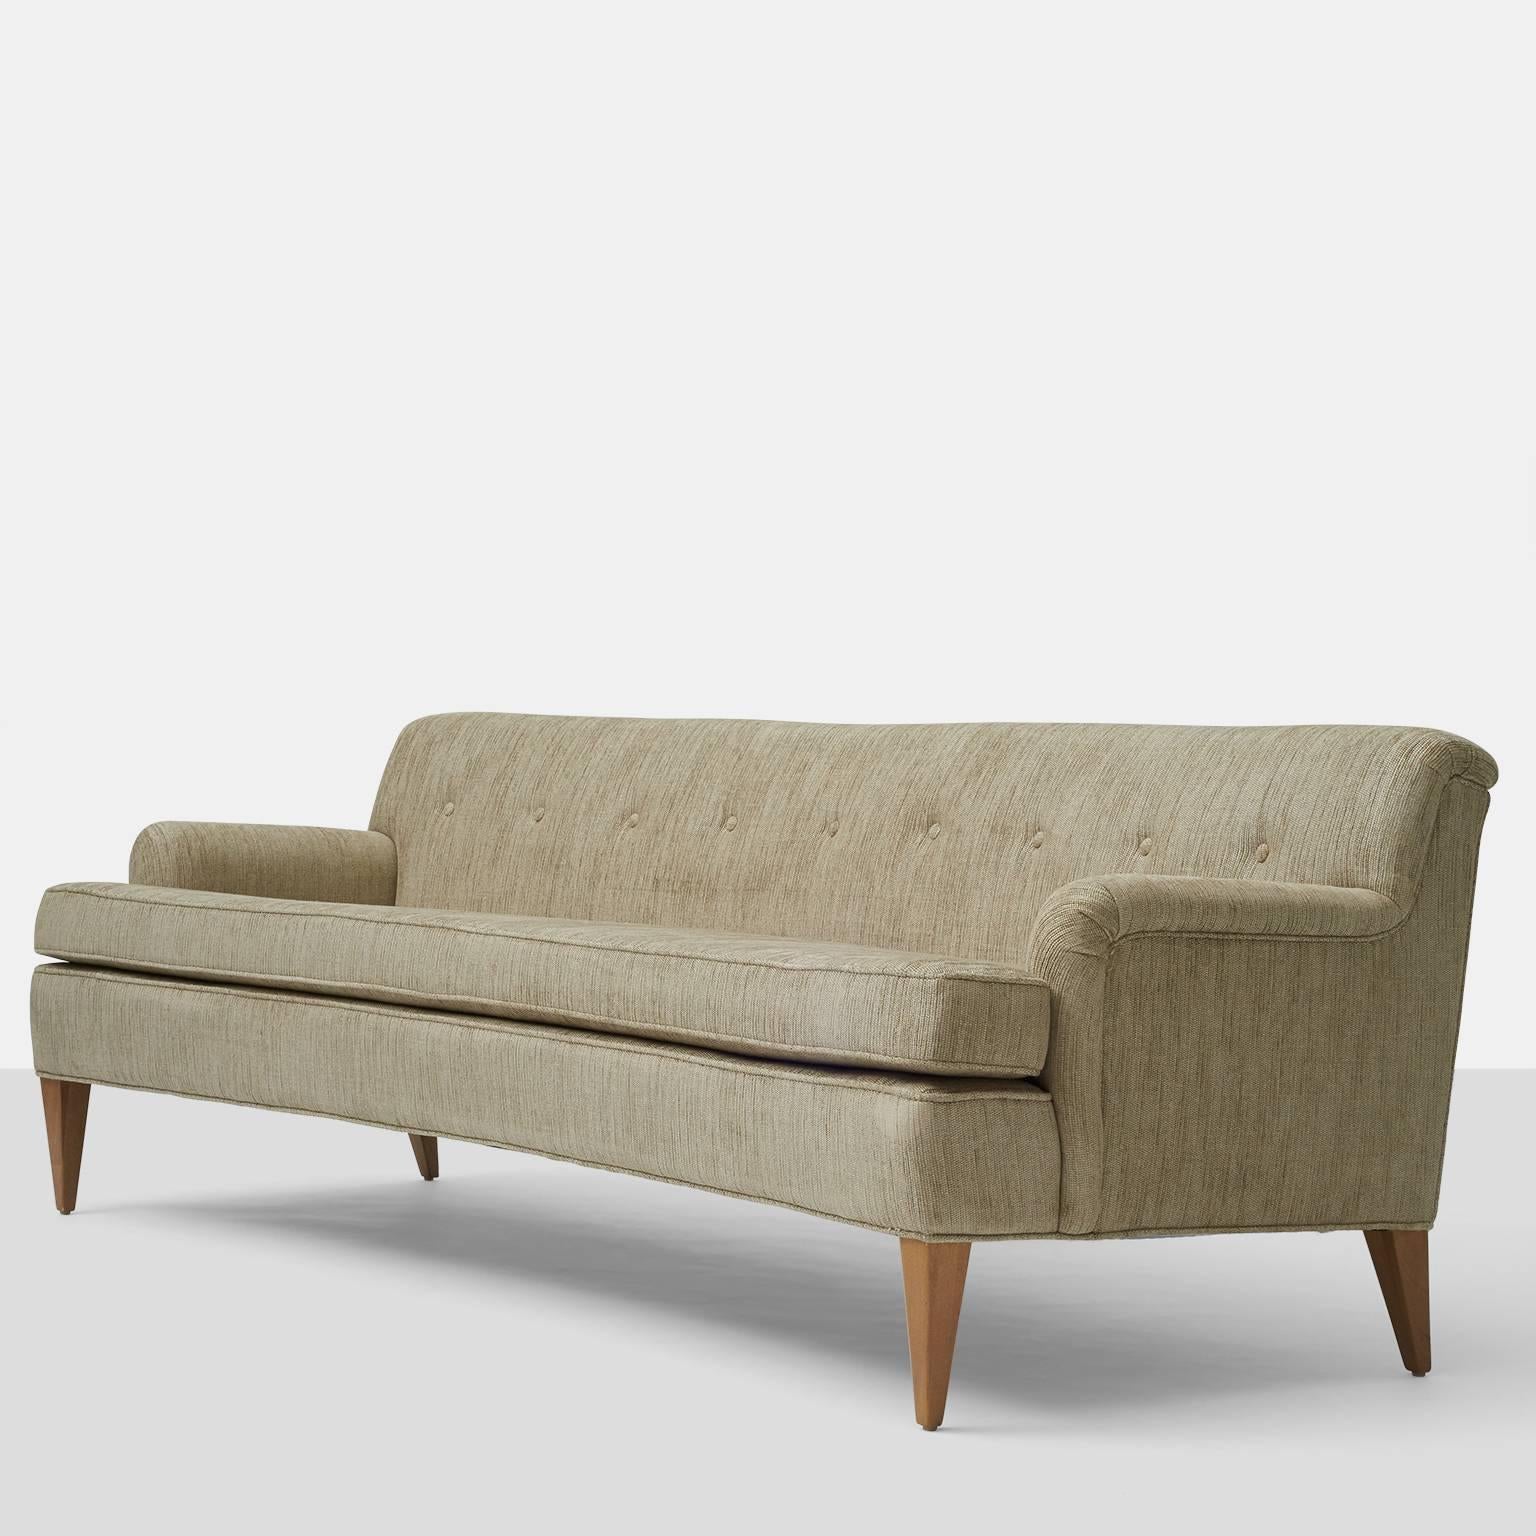 Edward Wormley for Dunbar, curved back sofa
An early curved back sofa by Edward Wormley for Dunbar. Beige chenille fabric with tapered wooden legs.
USA, circa 1950s.